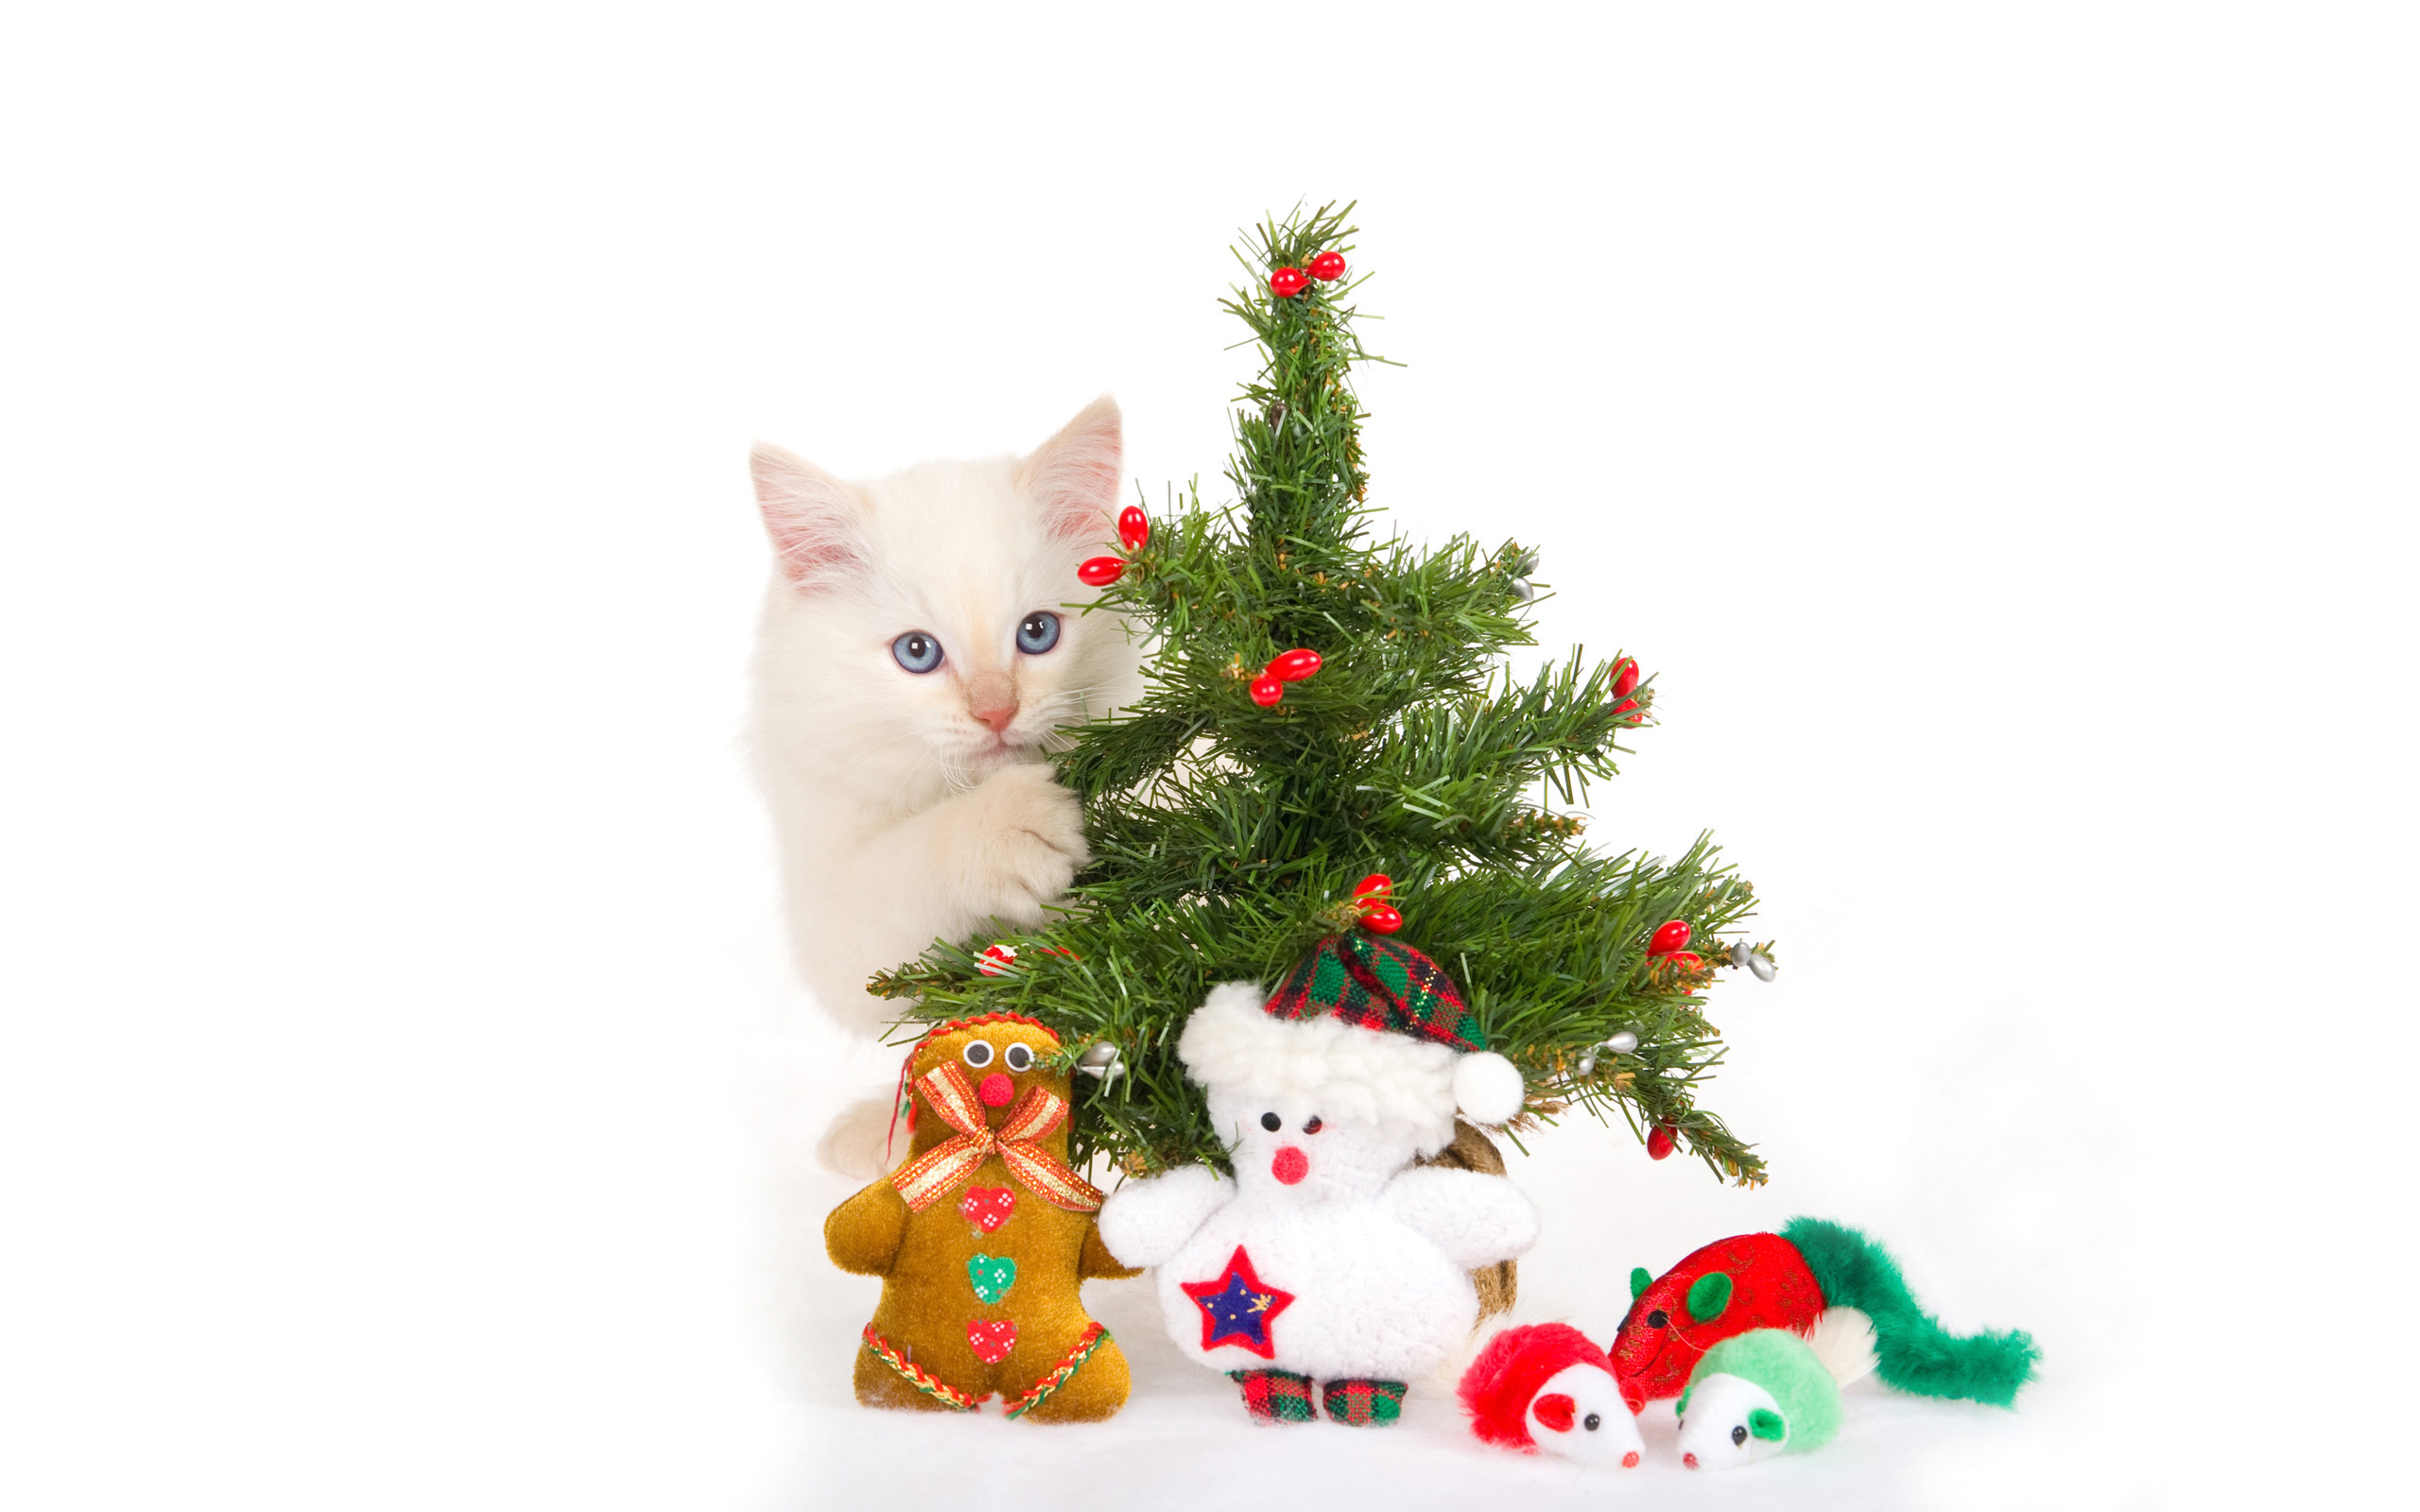 christmas xmas, animals, holidays, cats, new year, toys, fir trees wallpaper for mobile